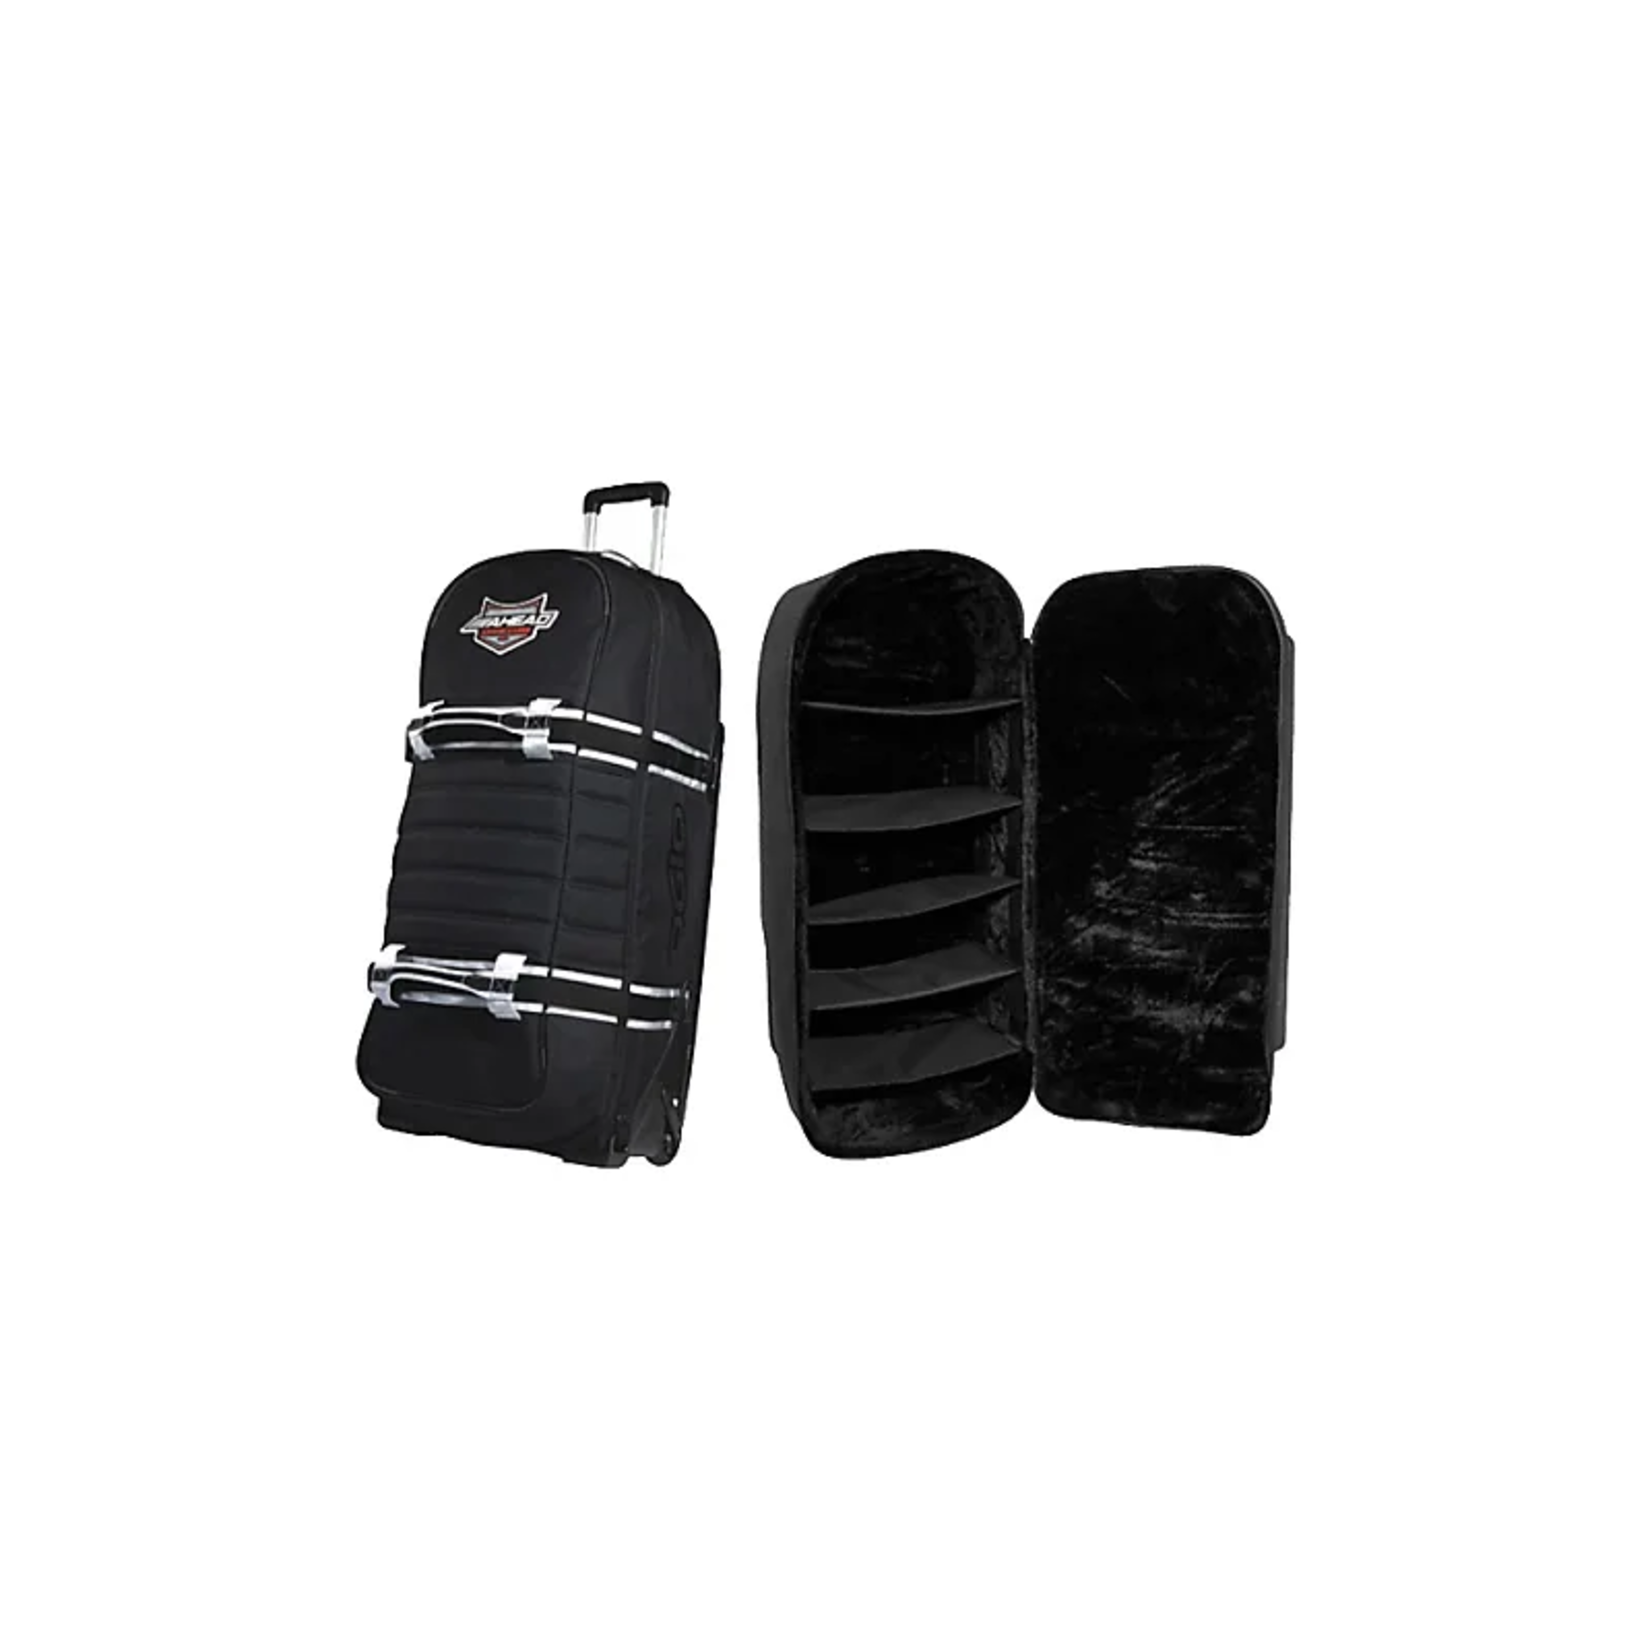 Ahead Ahead Armor Bag for Electronic Pads and Components AA5038E (fits into AA5038W)